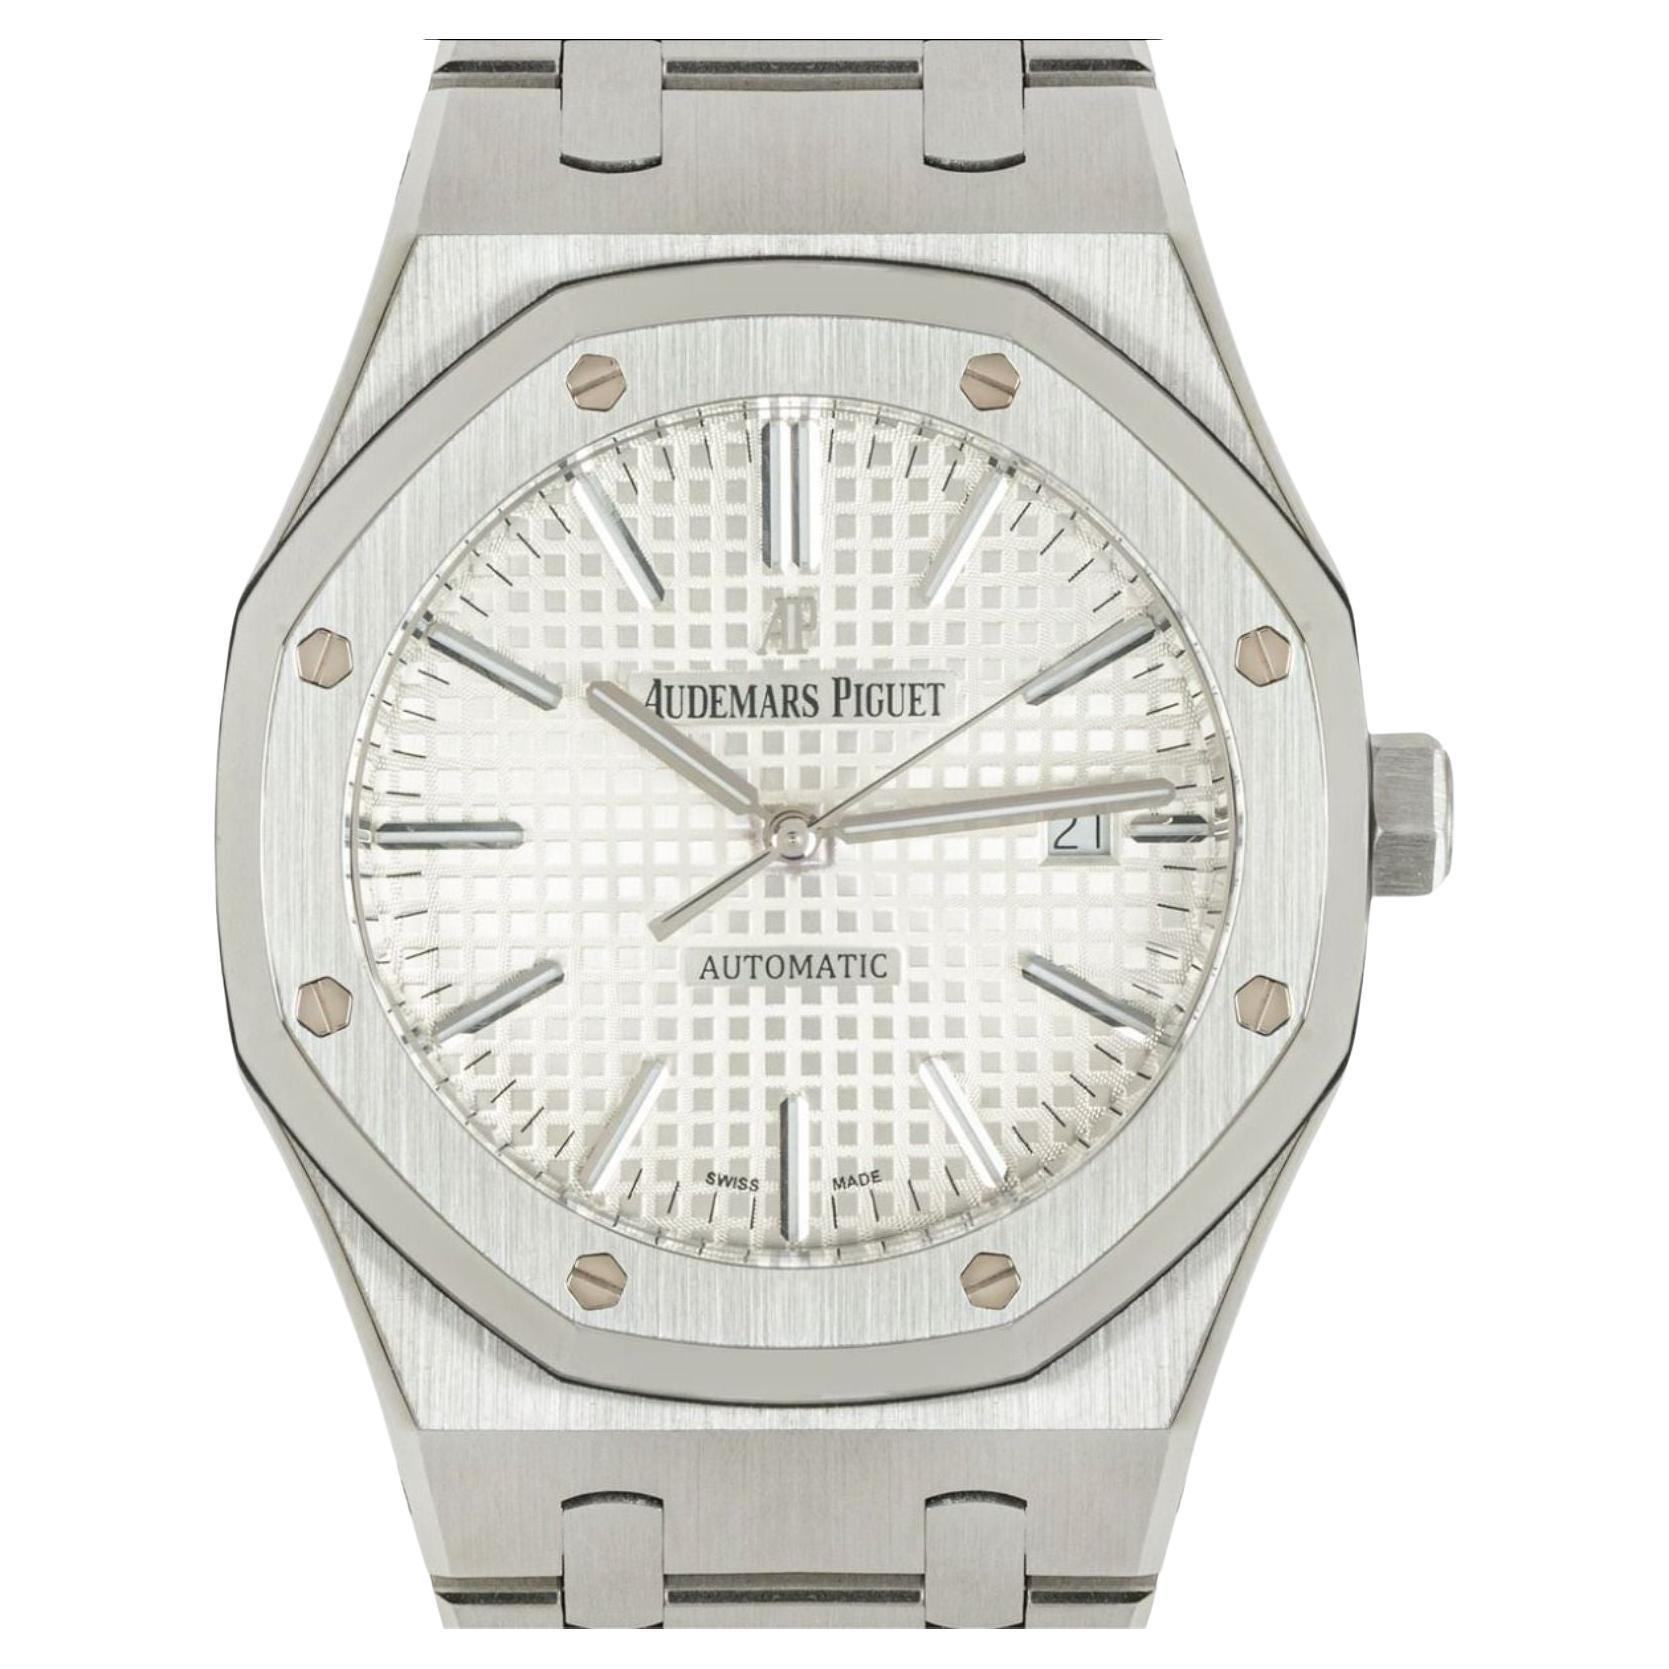 A 41mm stainless steel Royal Oak by Audemars Piguet. Features a white guilloche dial with grande tapisserie pattern, a date aperture and a stainless steel bezel featuring the iconic 8-screw design.

Equipped with a steel bracelet and an AP folding